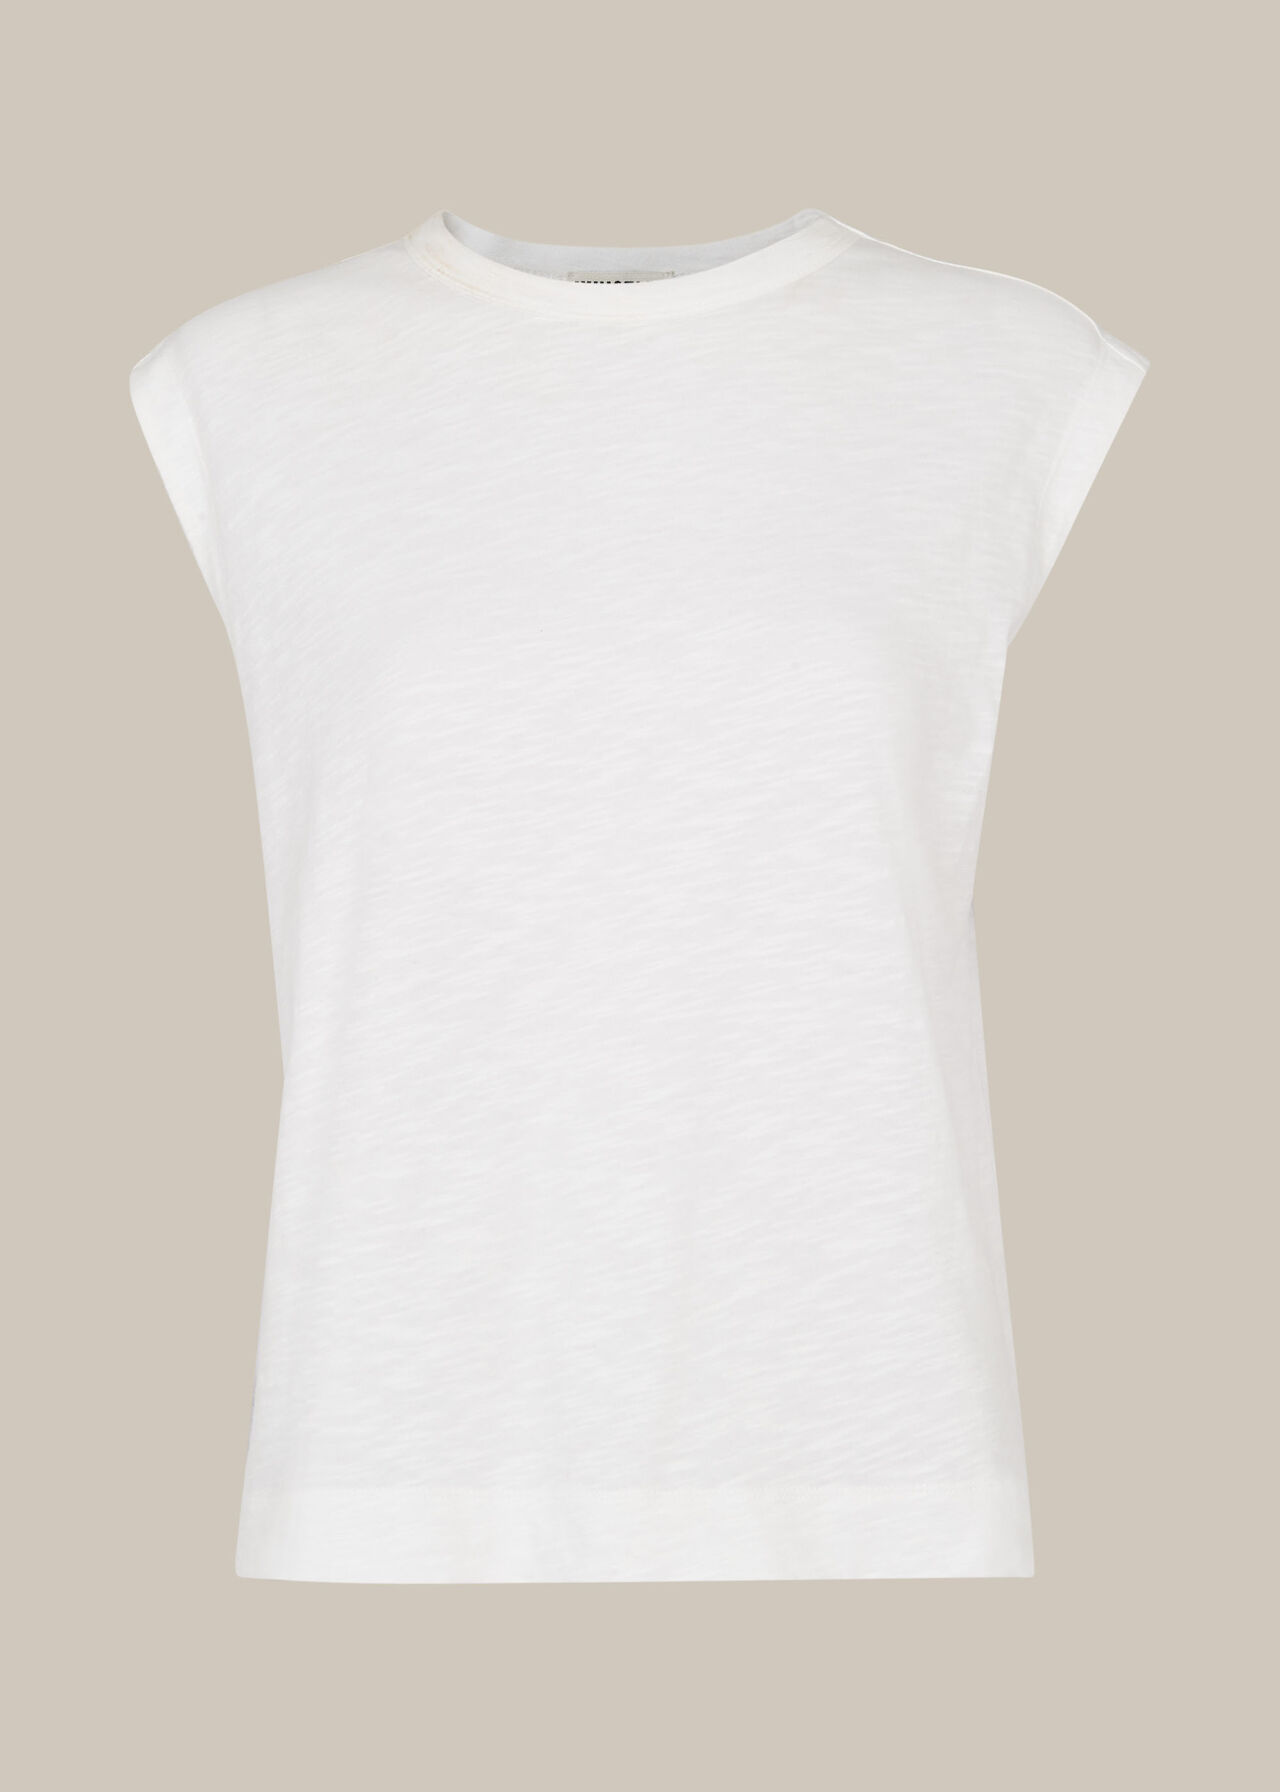 White Easy Muscle Vest Top | WHISTLES